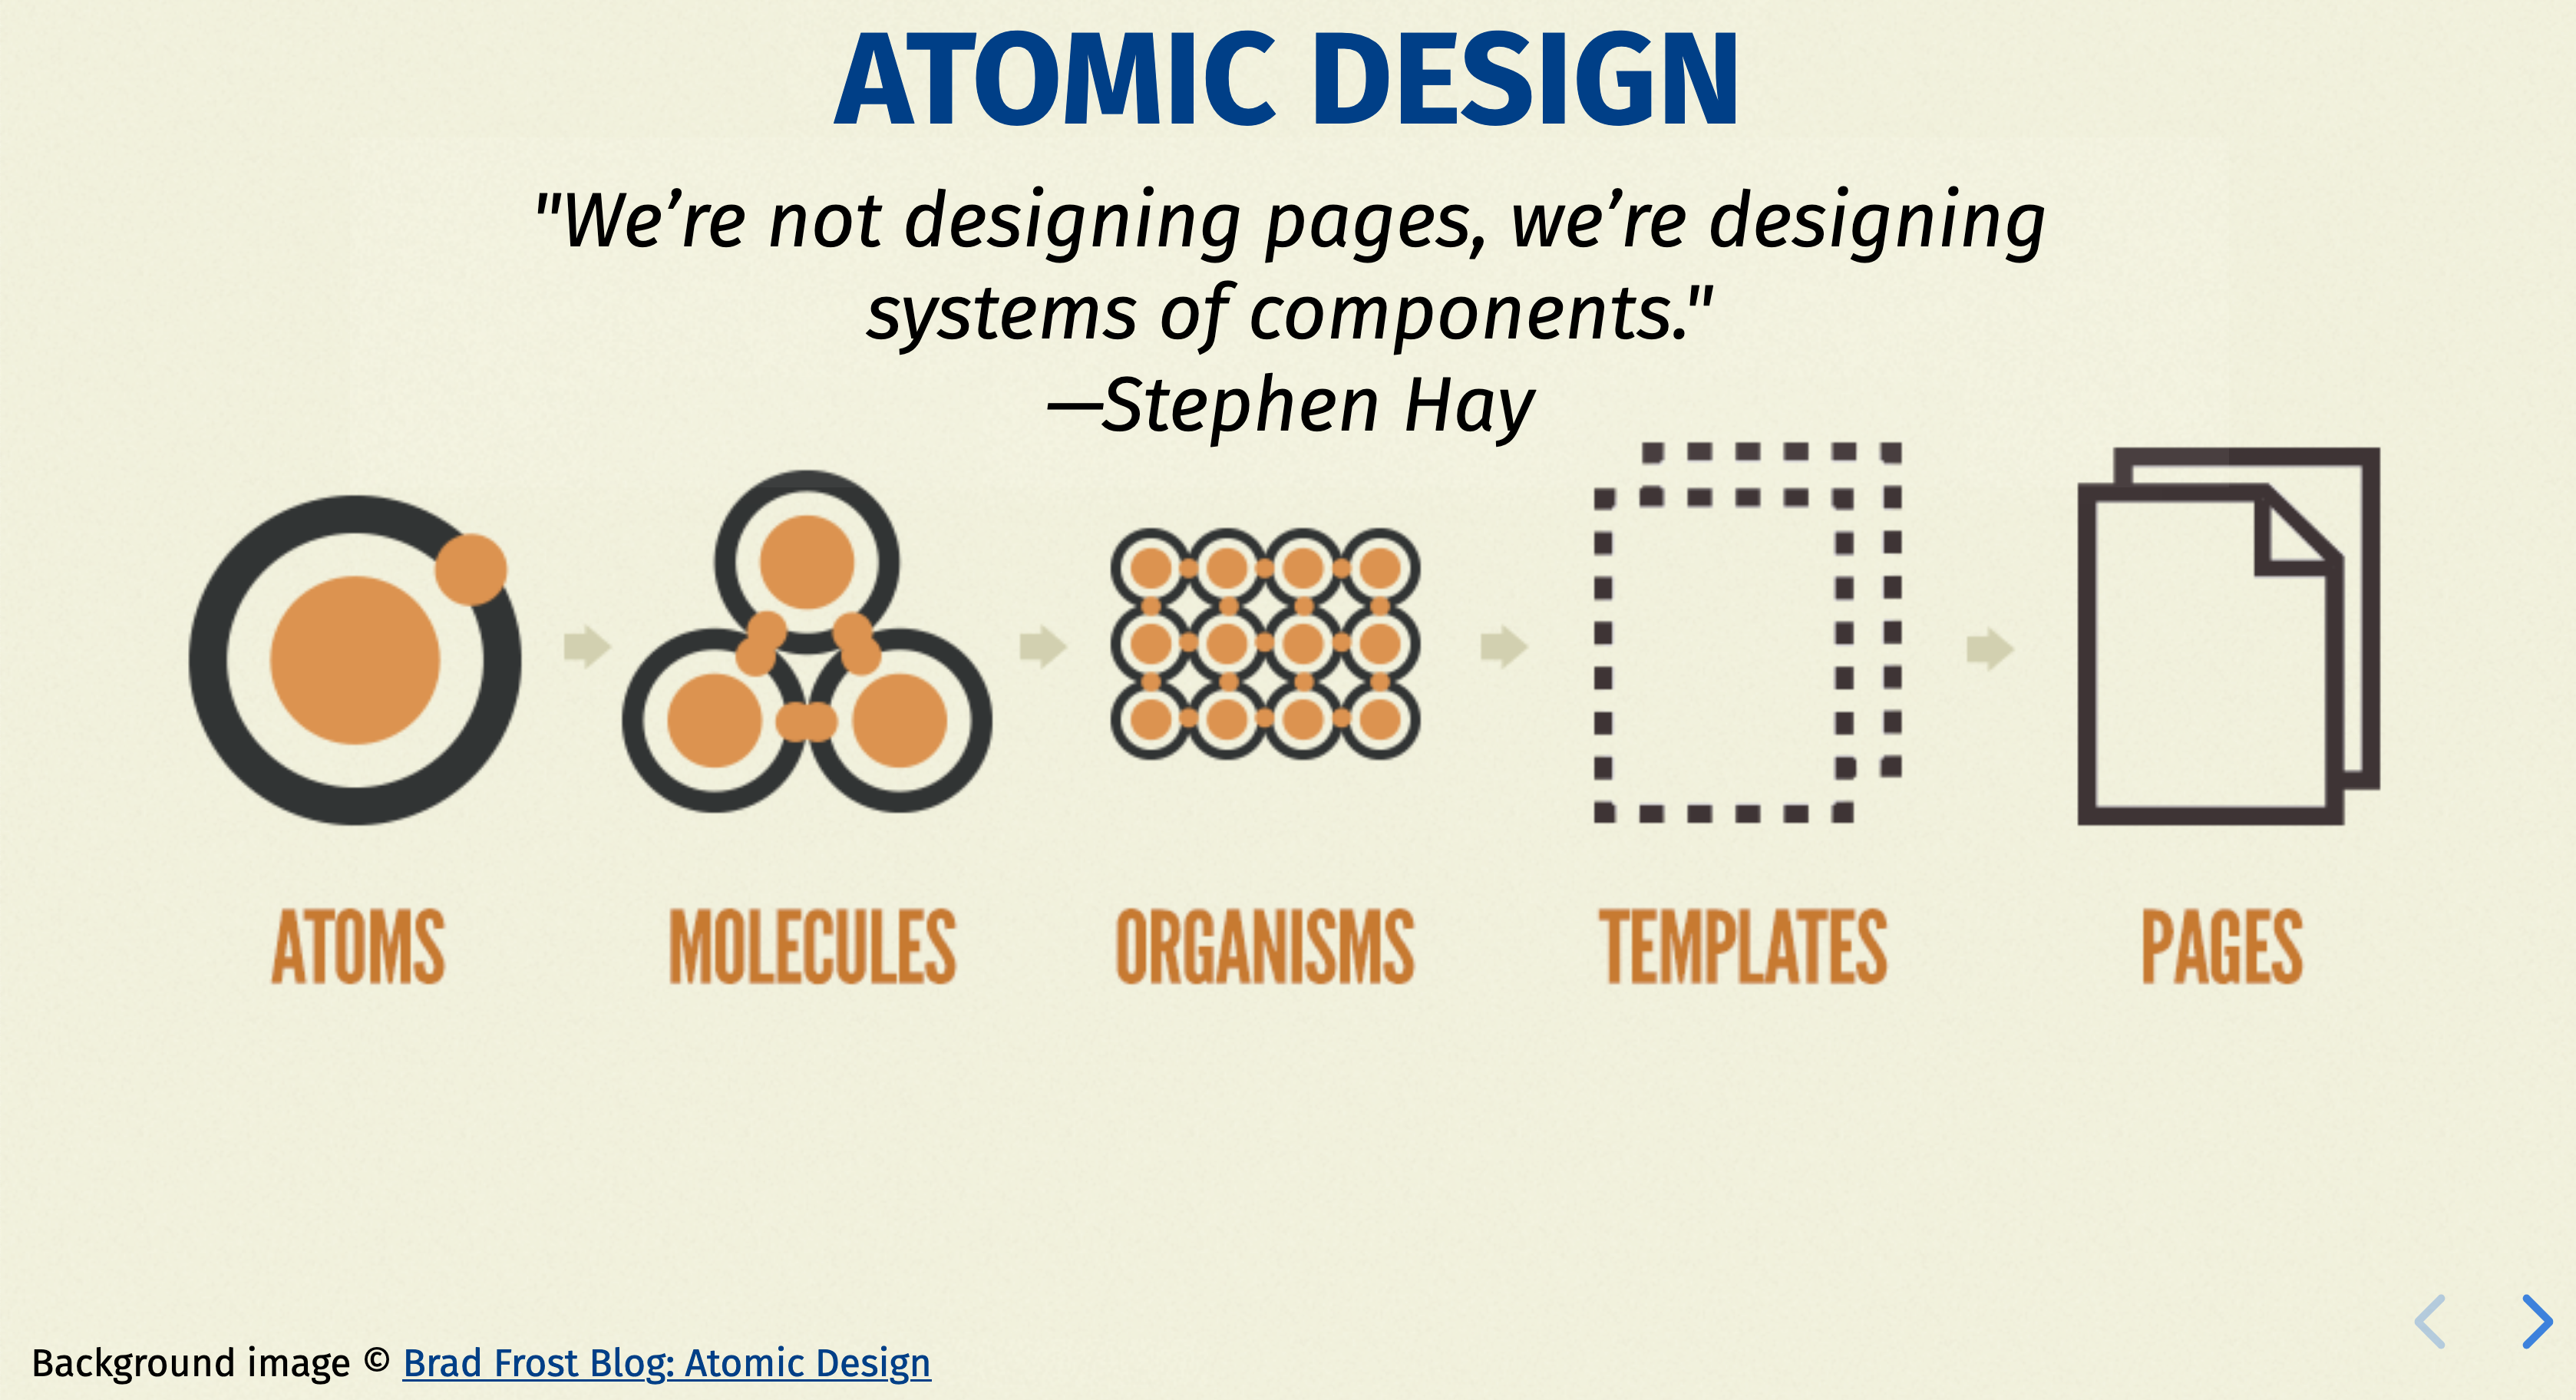 example slide showing atomic design components from atoms to pages 